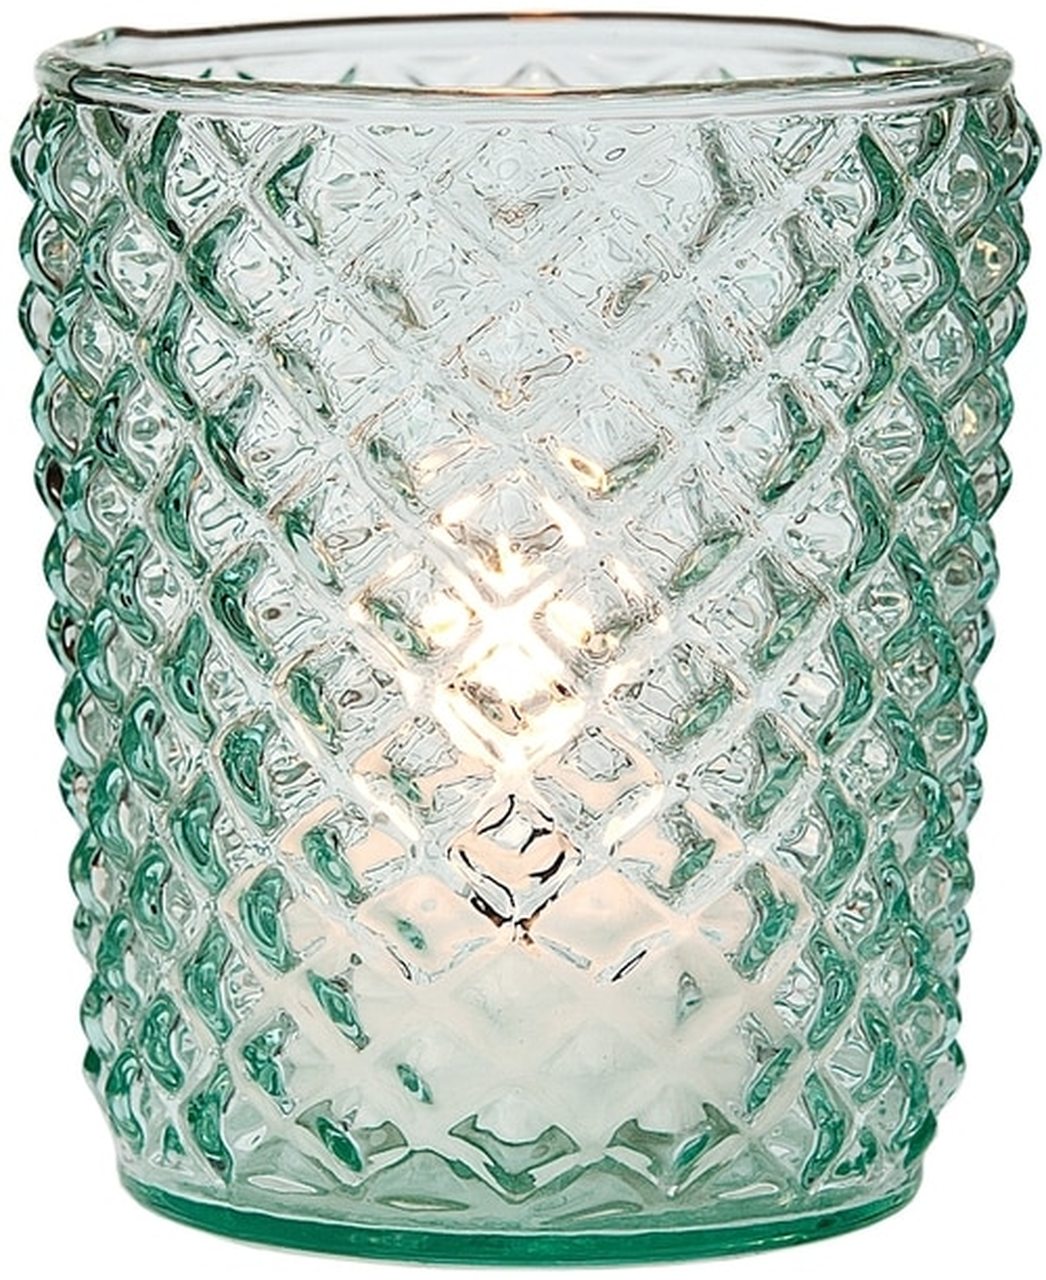 Vintage Glass Candle Holder (3-Inch, Zariah Design, Vintage Green) - For Use with Tea Lights - For Home Decor, Parties, and Wedding Decorations - AsianImportStore.com - B2B Wholesale Lighting and Decor